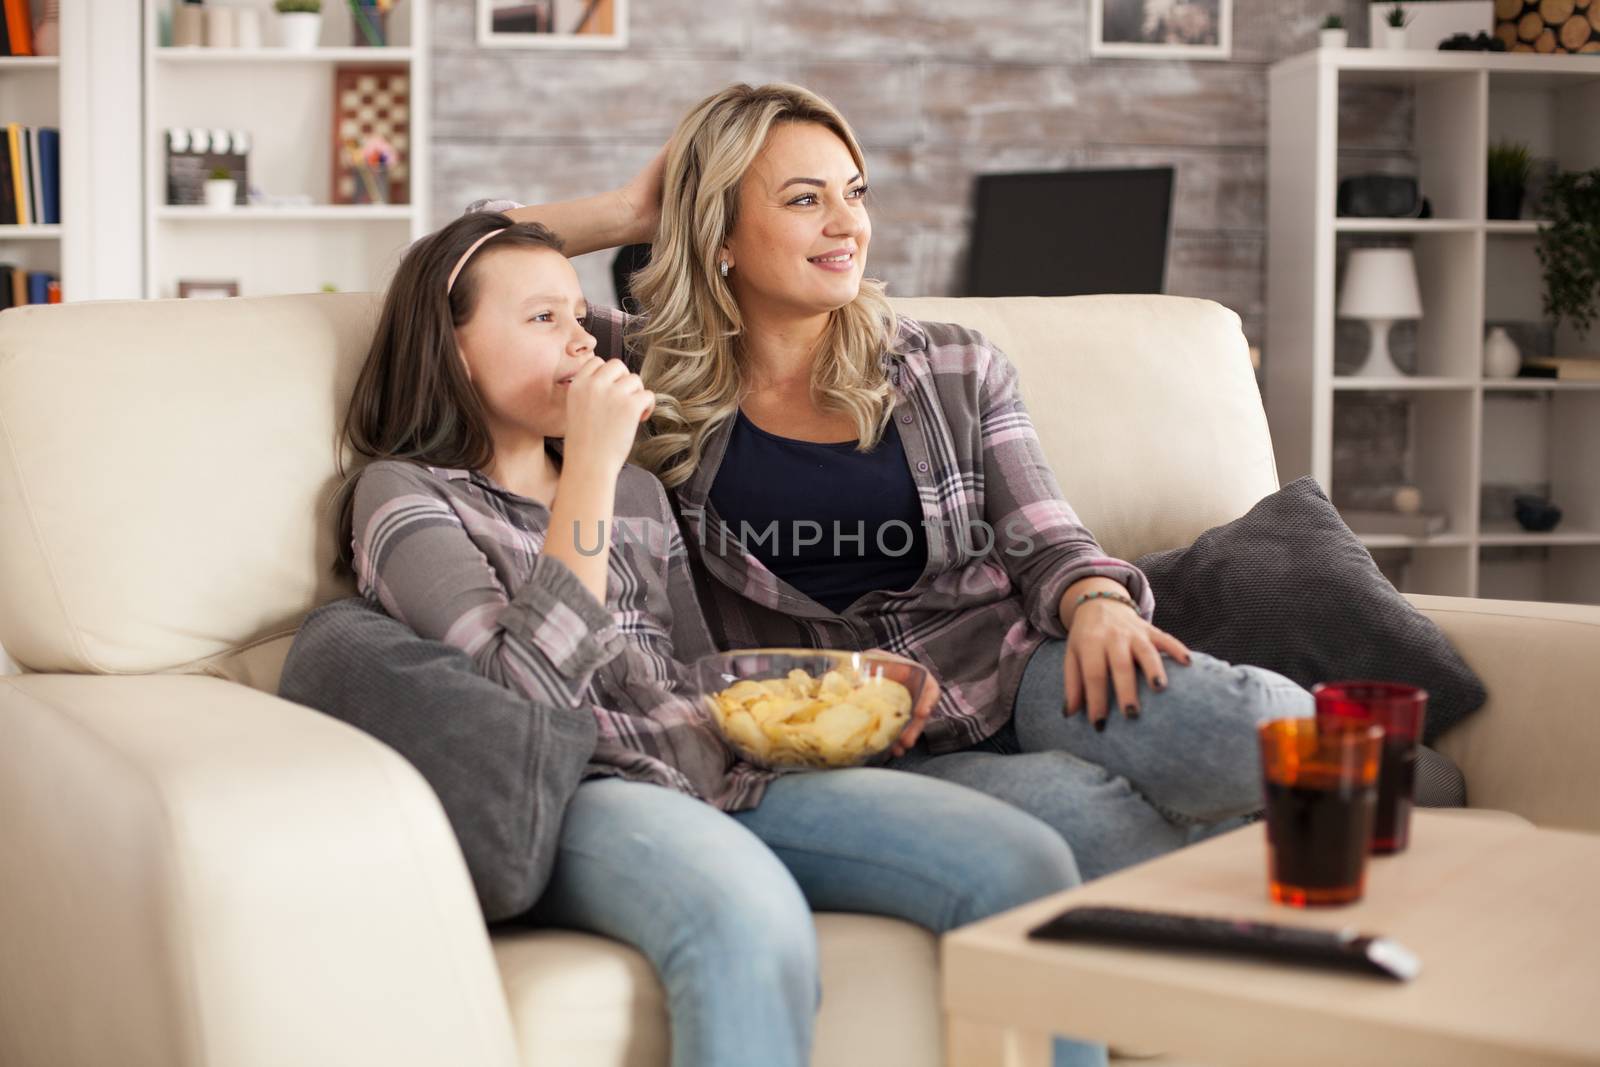 Relaxed young mother and cheerful daughter watching tv sitting on sofa eating chips.